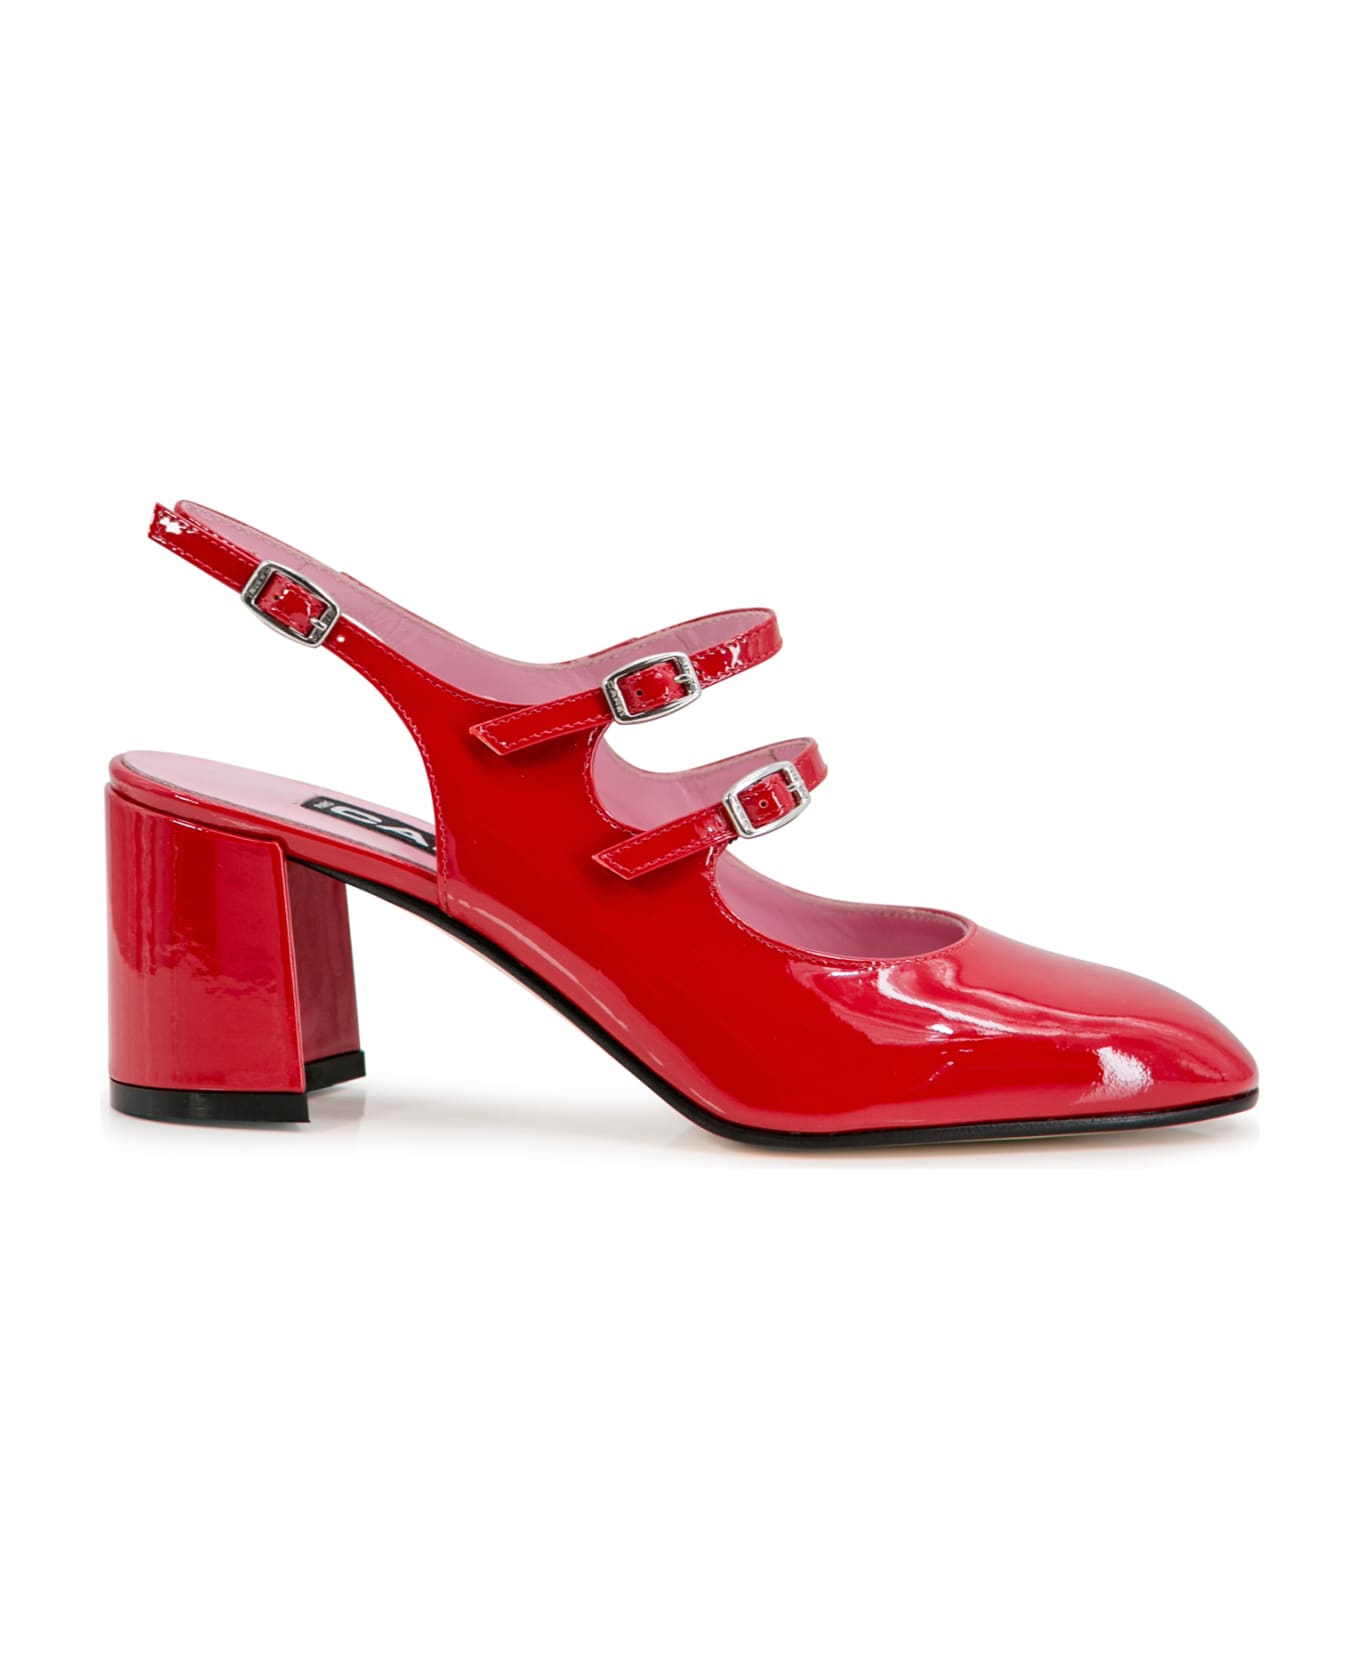 Carel 70mm Patent Leather Pumps - Red